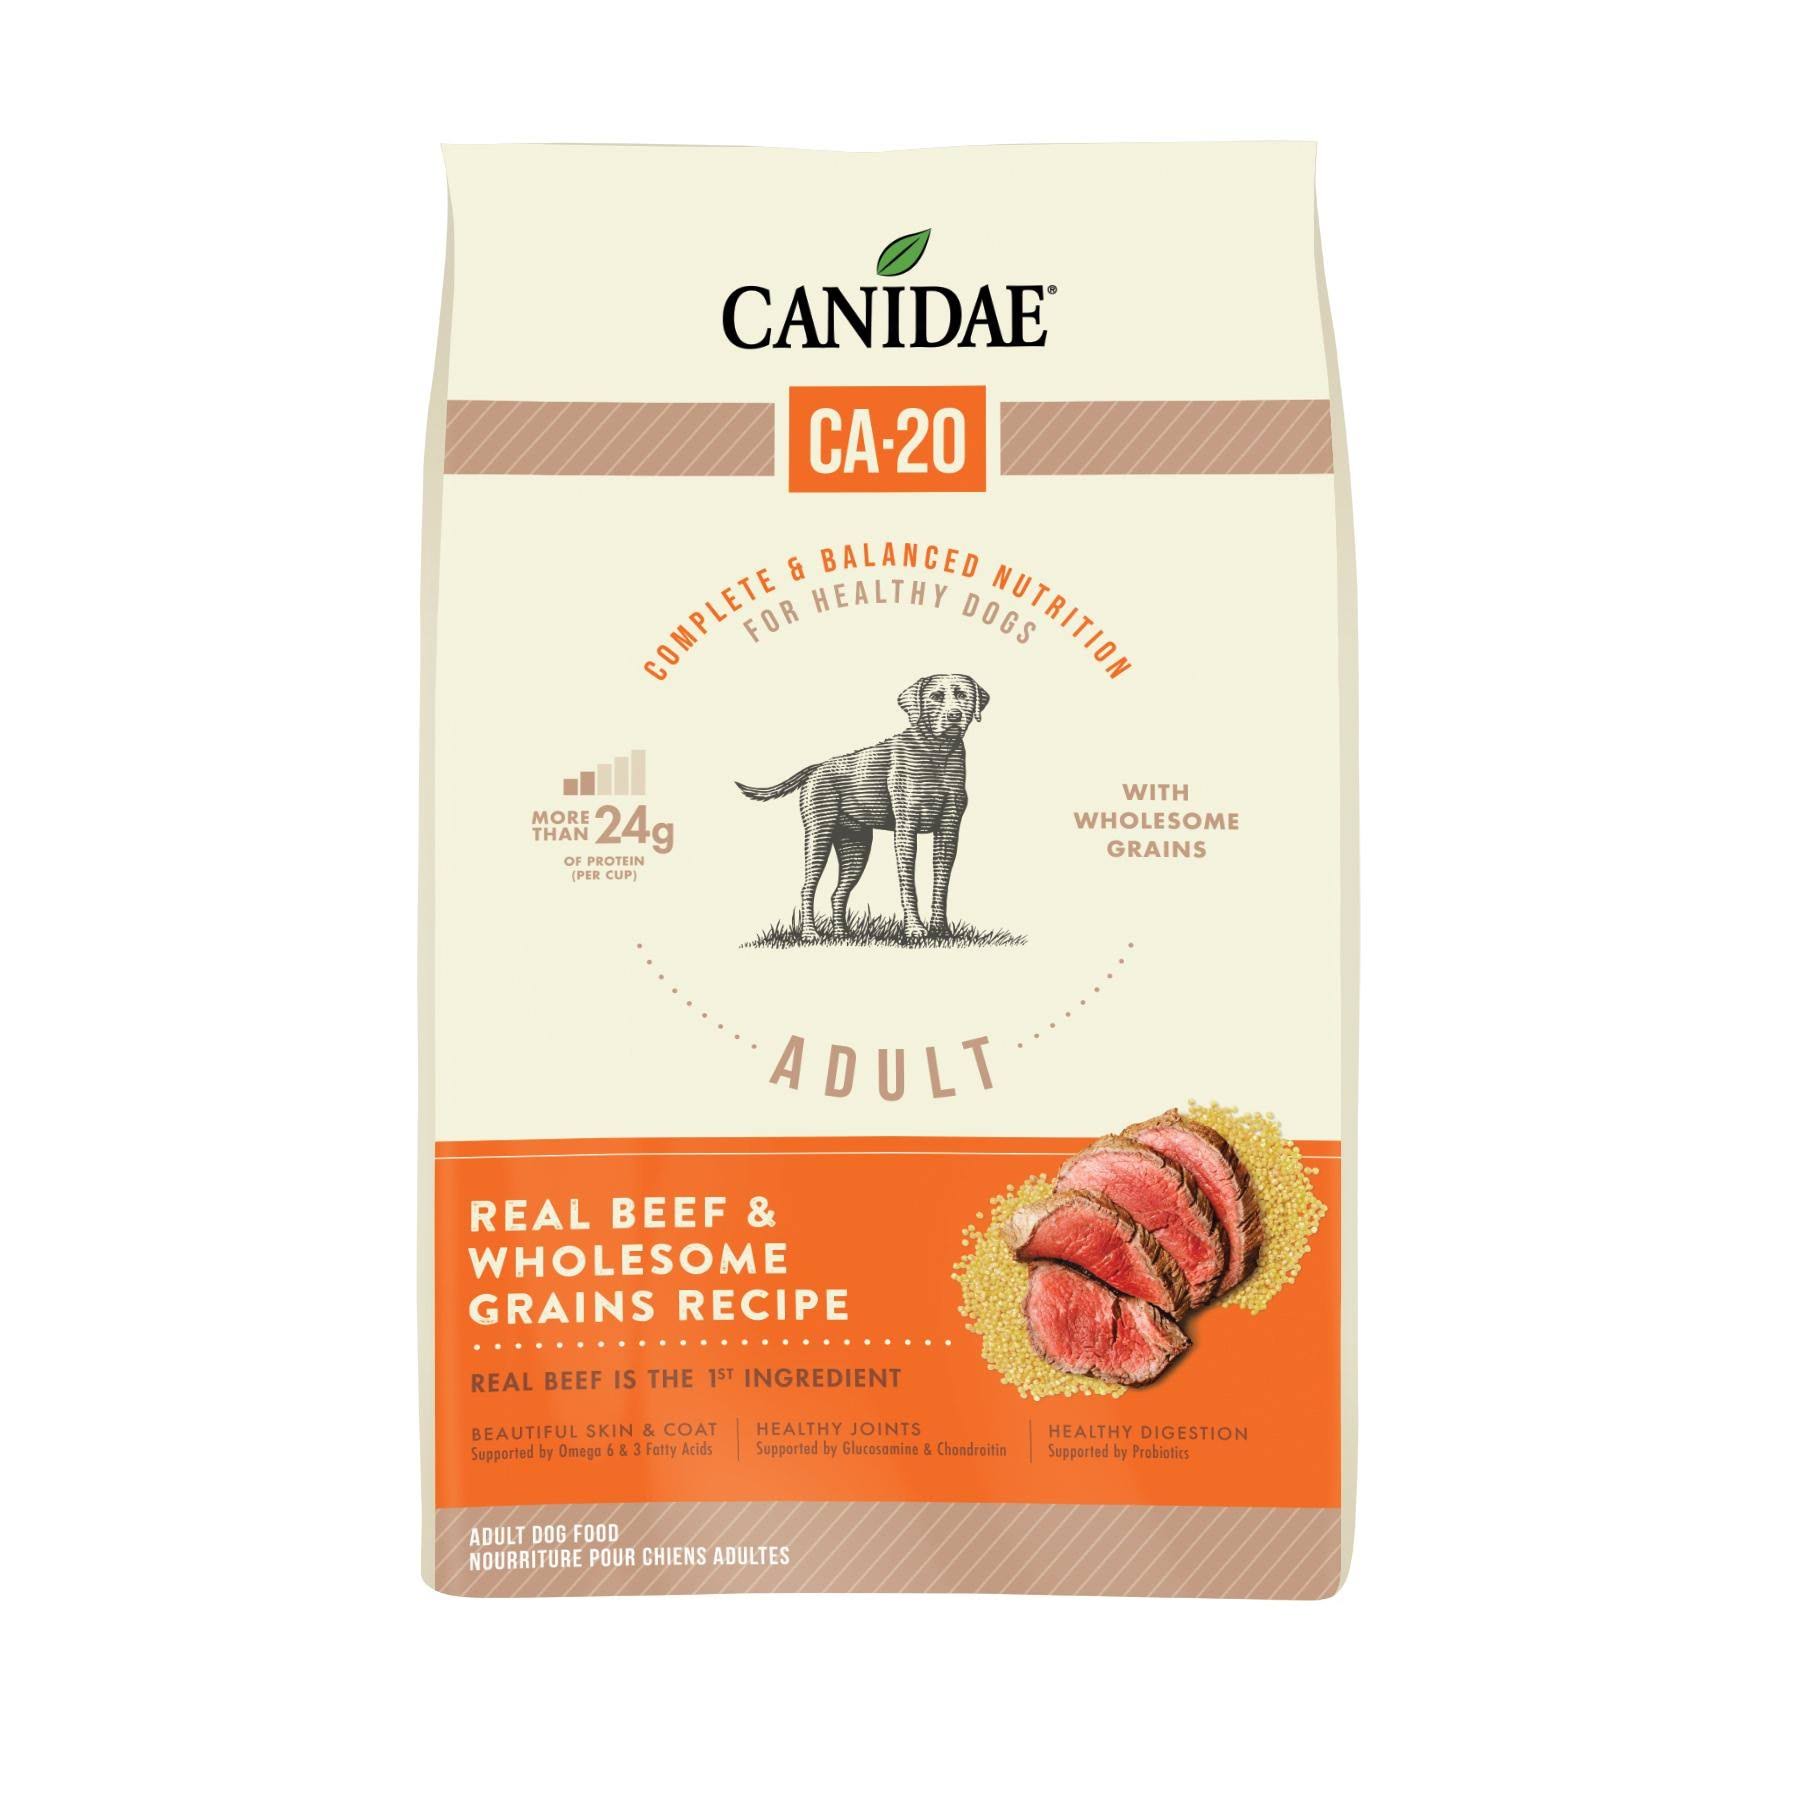 Canidae CA-20 Real Beef & Wholesome Grains Recipe Dry Dog Food, 7-Lb.